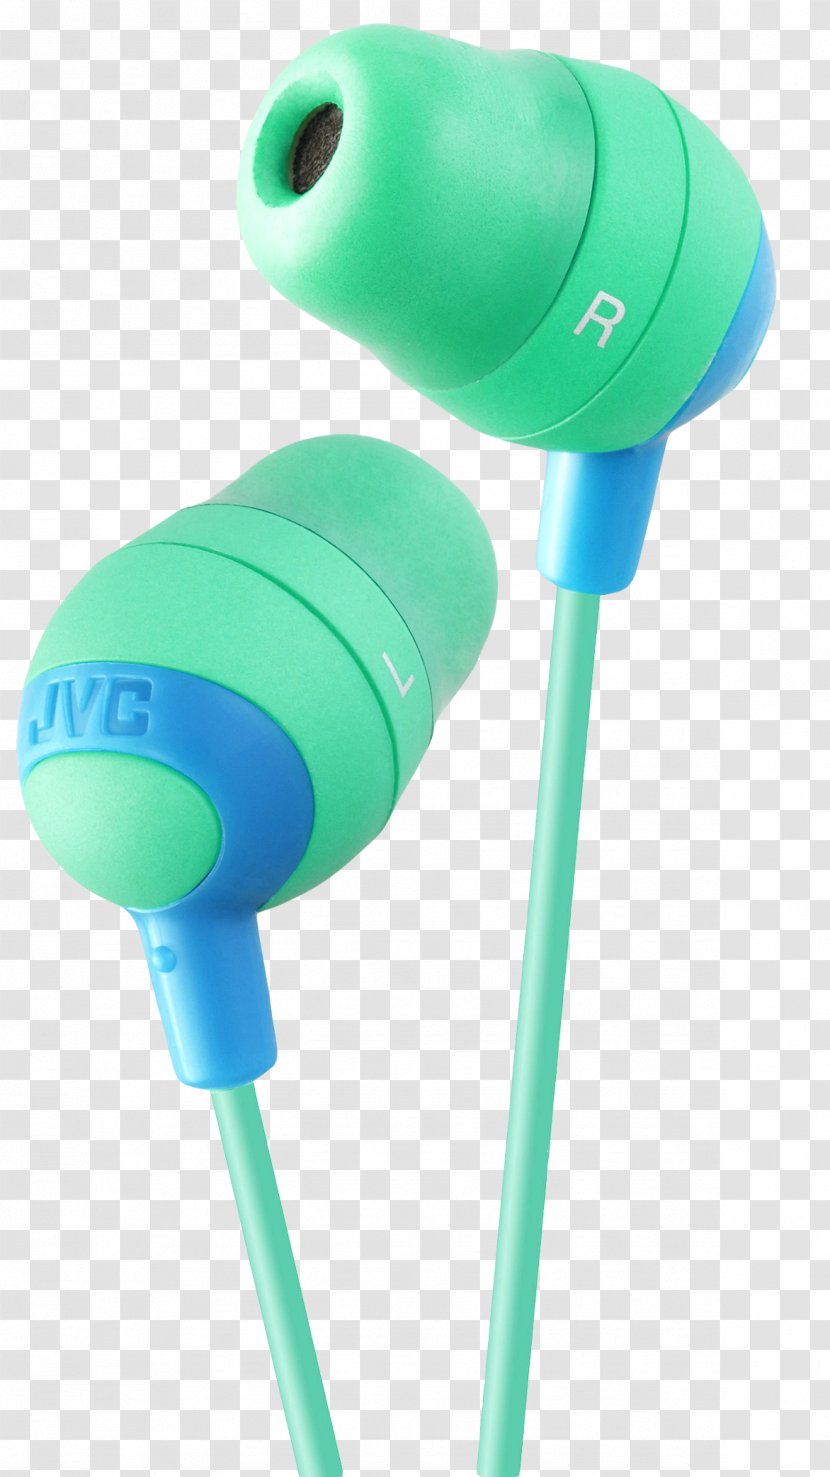 Headphones Microphone Stereophonic Sound Apple Earbuds - Audio Equipment - Earphone Transparent PNG